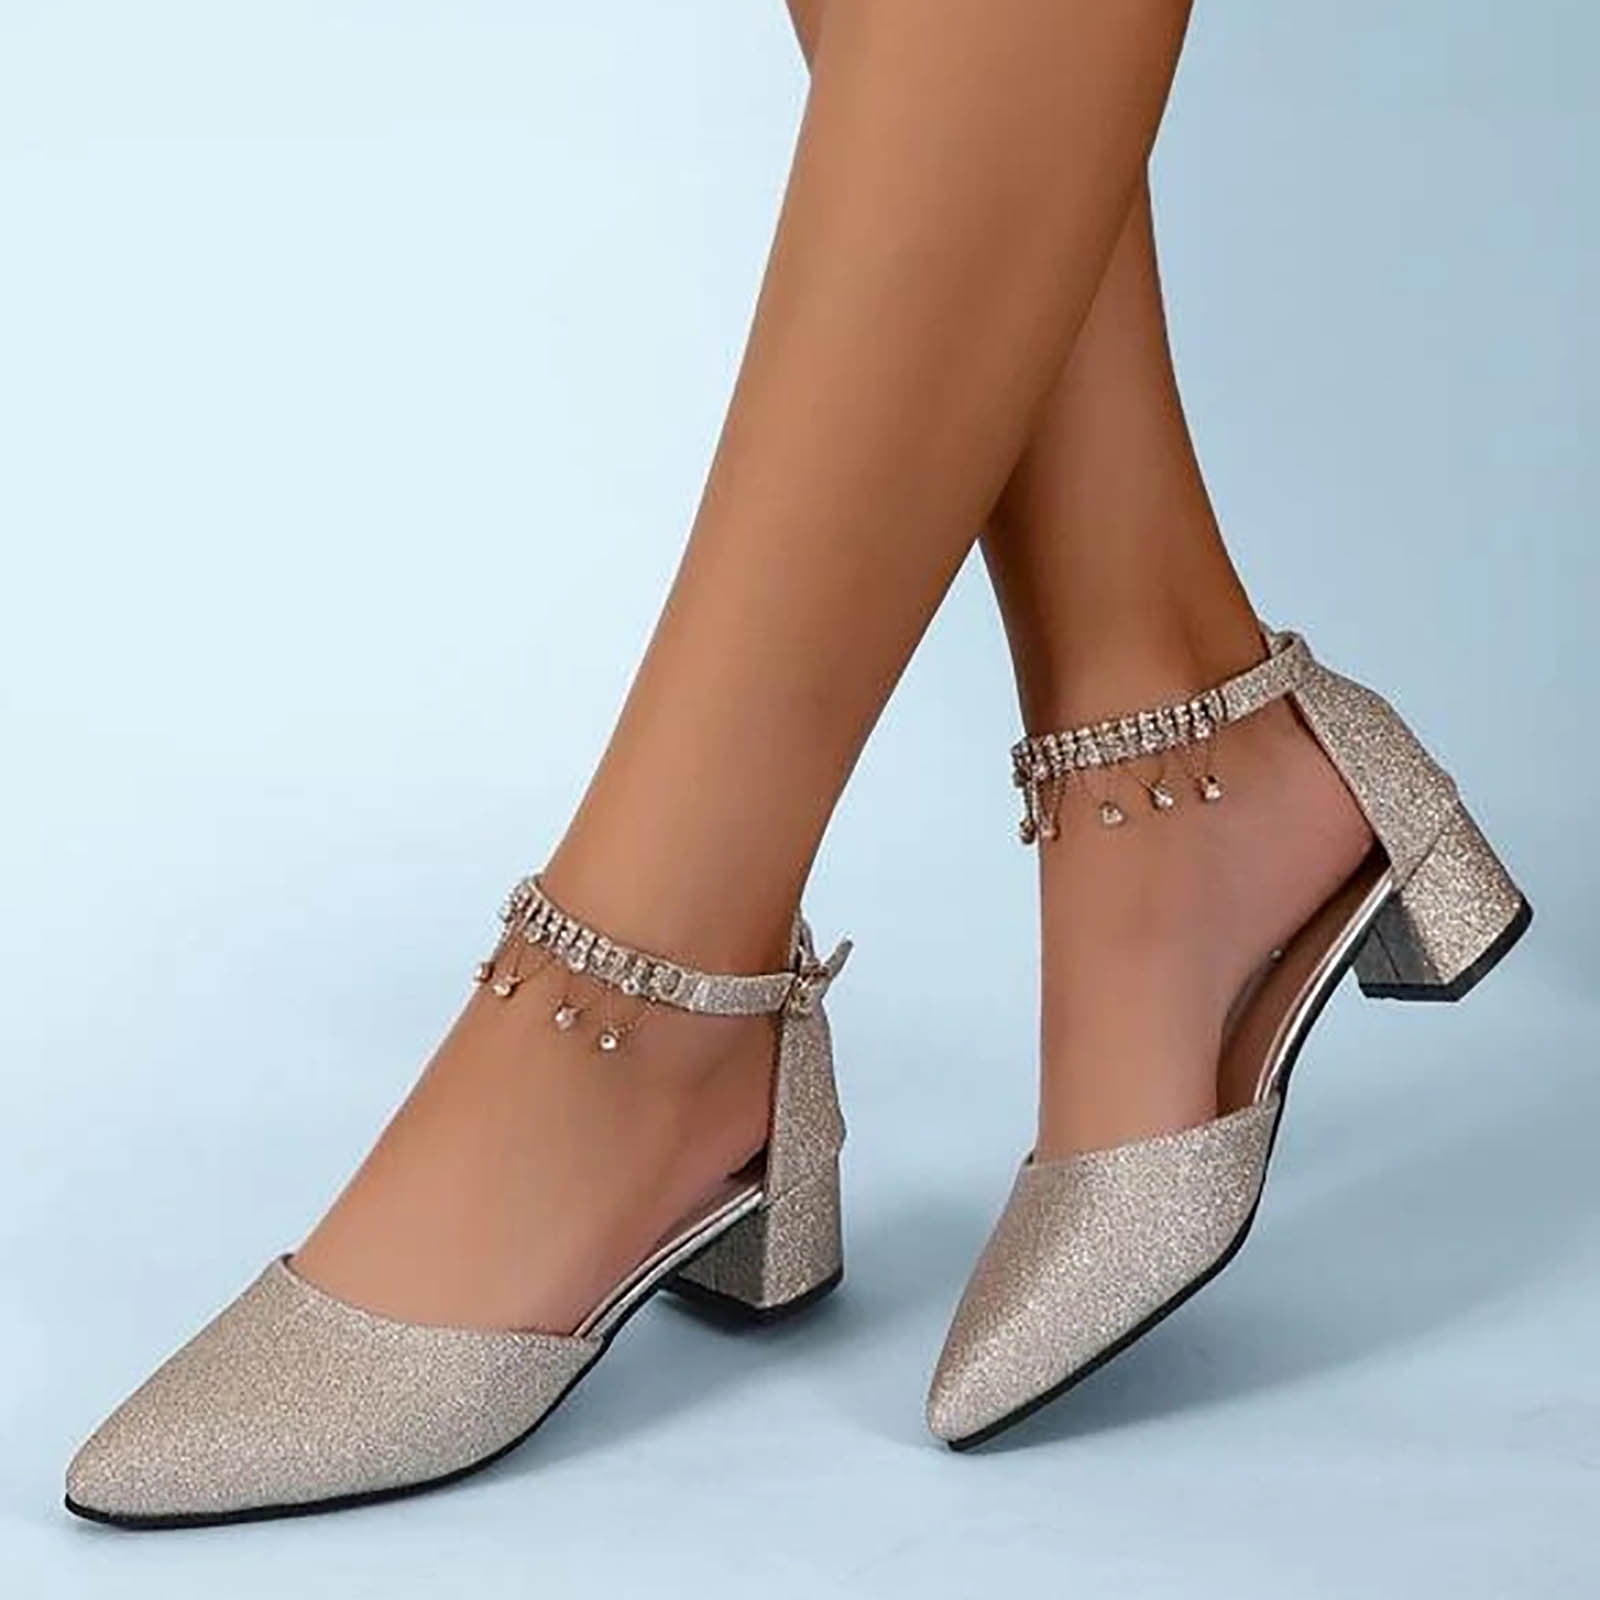 Pretty Women's Ankle-Strap Heels in the Latest Styles | Affordable Women's  Strappy Heels for Special Occasions and Everyday Wear - Lulus | Fashion  heels, Leather shoes woman, Ankle strap heels